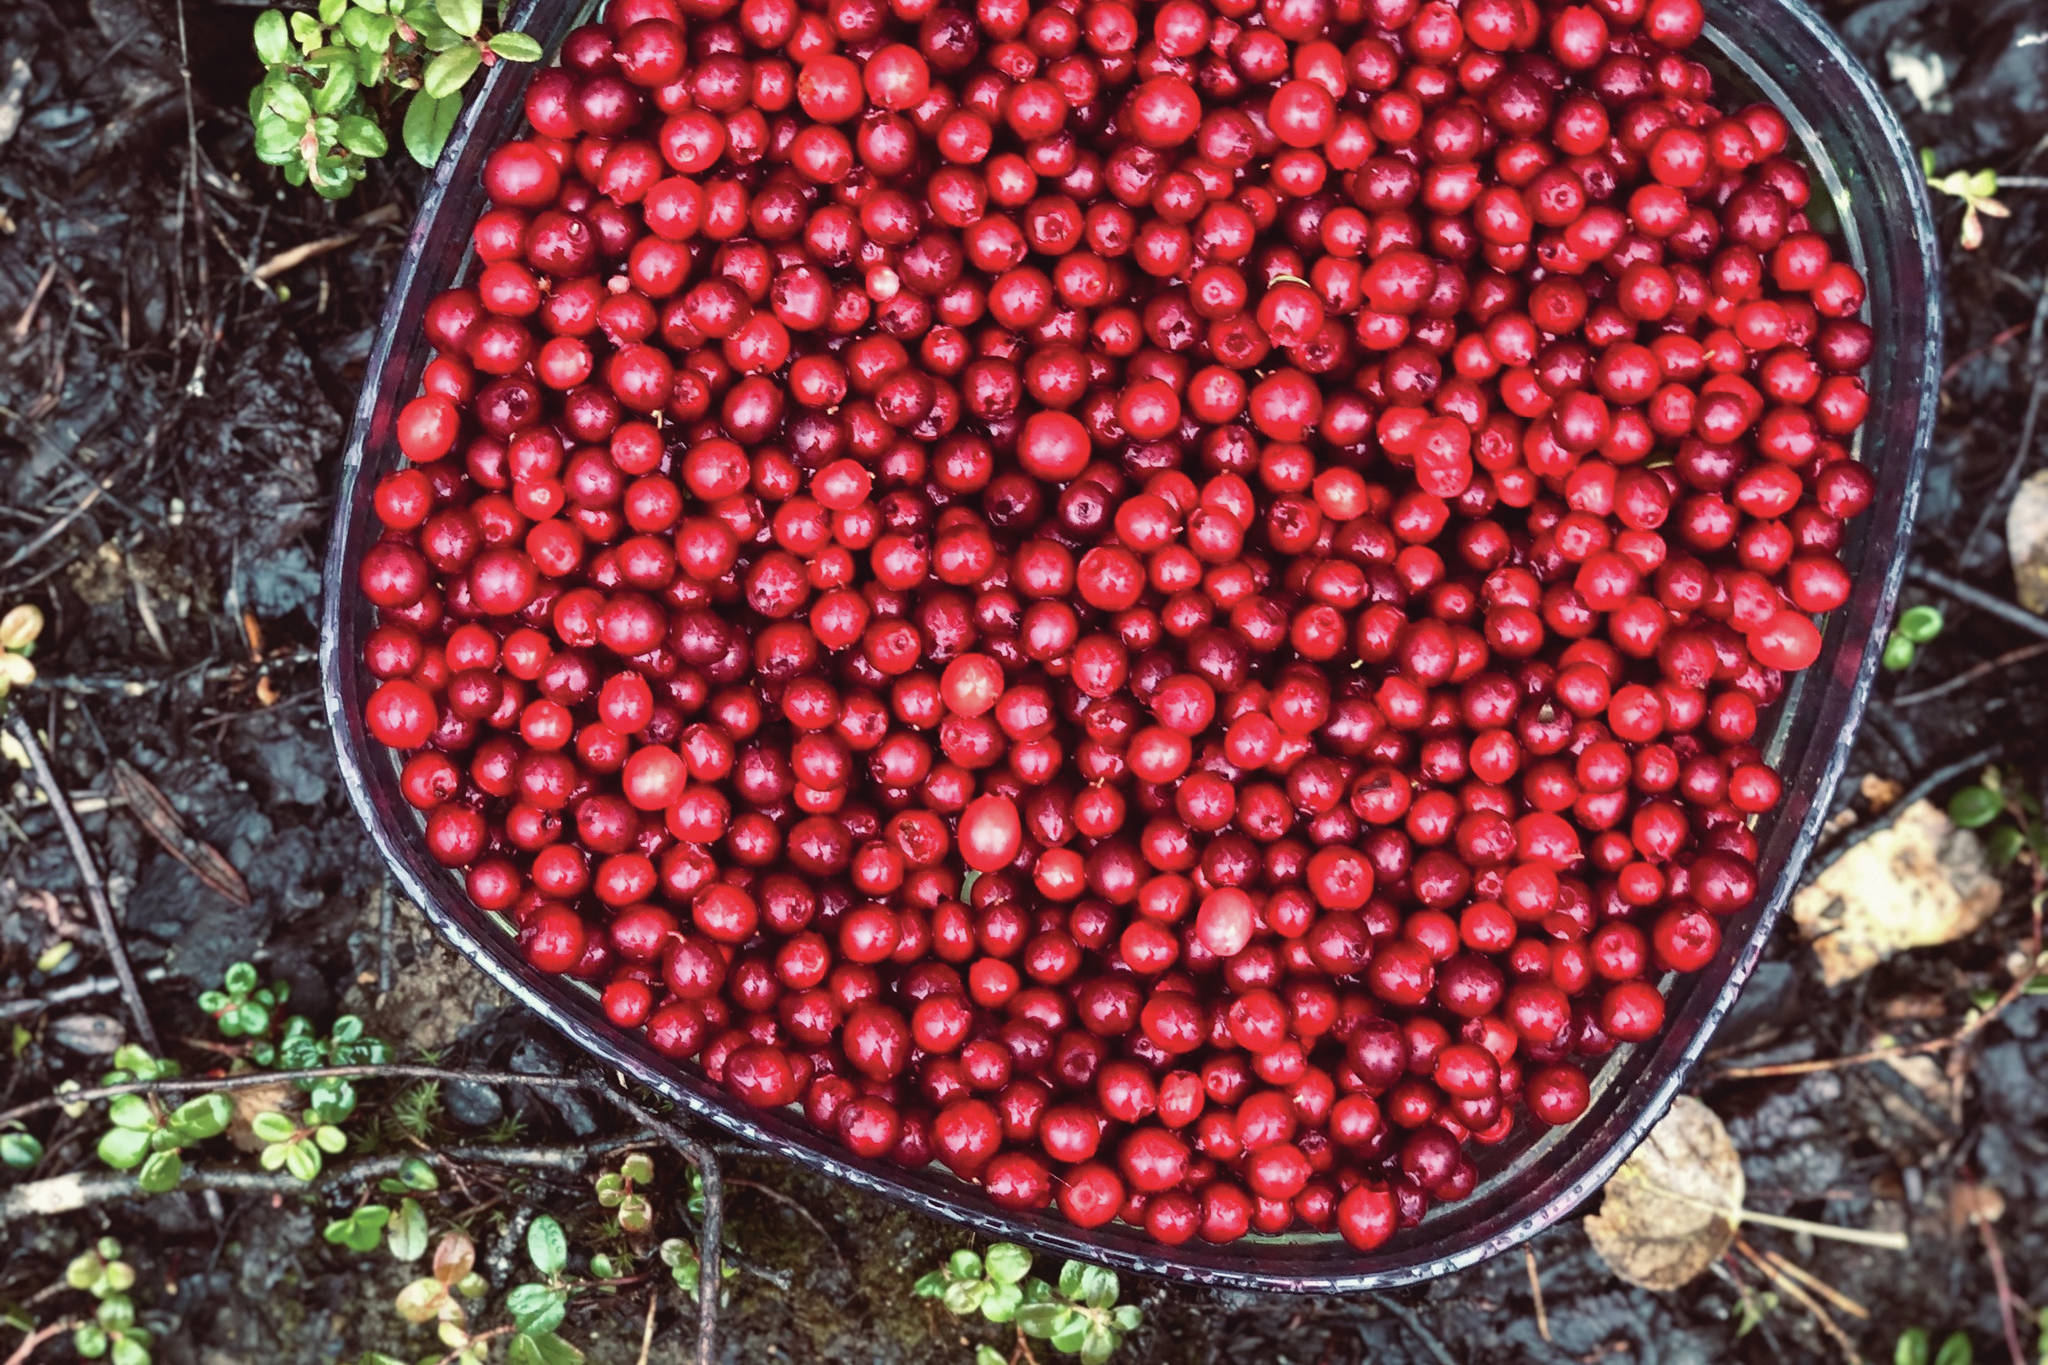 Low-bush cranberries are gathered in Anchorage, Alaska, on Monday, Sept. 7, 2020. (Photo by Victoria Petersen/Peninsula Clarion)
Low-bush cranberries are gathered in Anchorage, Alaska, on Monday, Sept. 7, 2020. (Photo by Victoria Petersen/Peninsula Clarion)